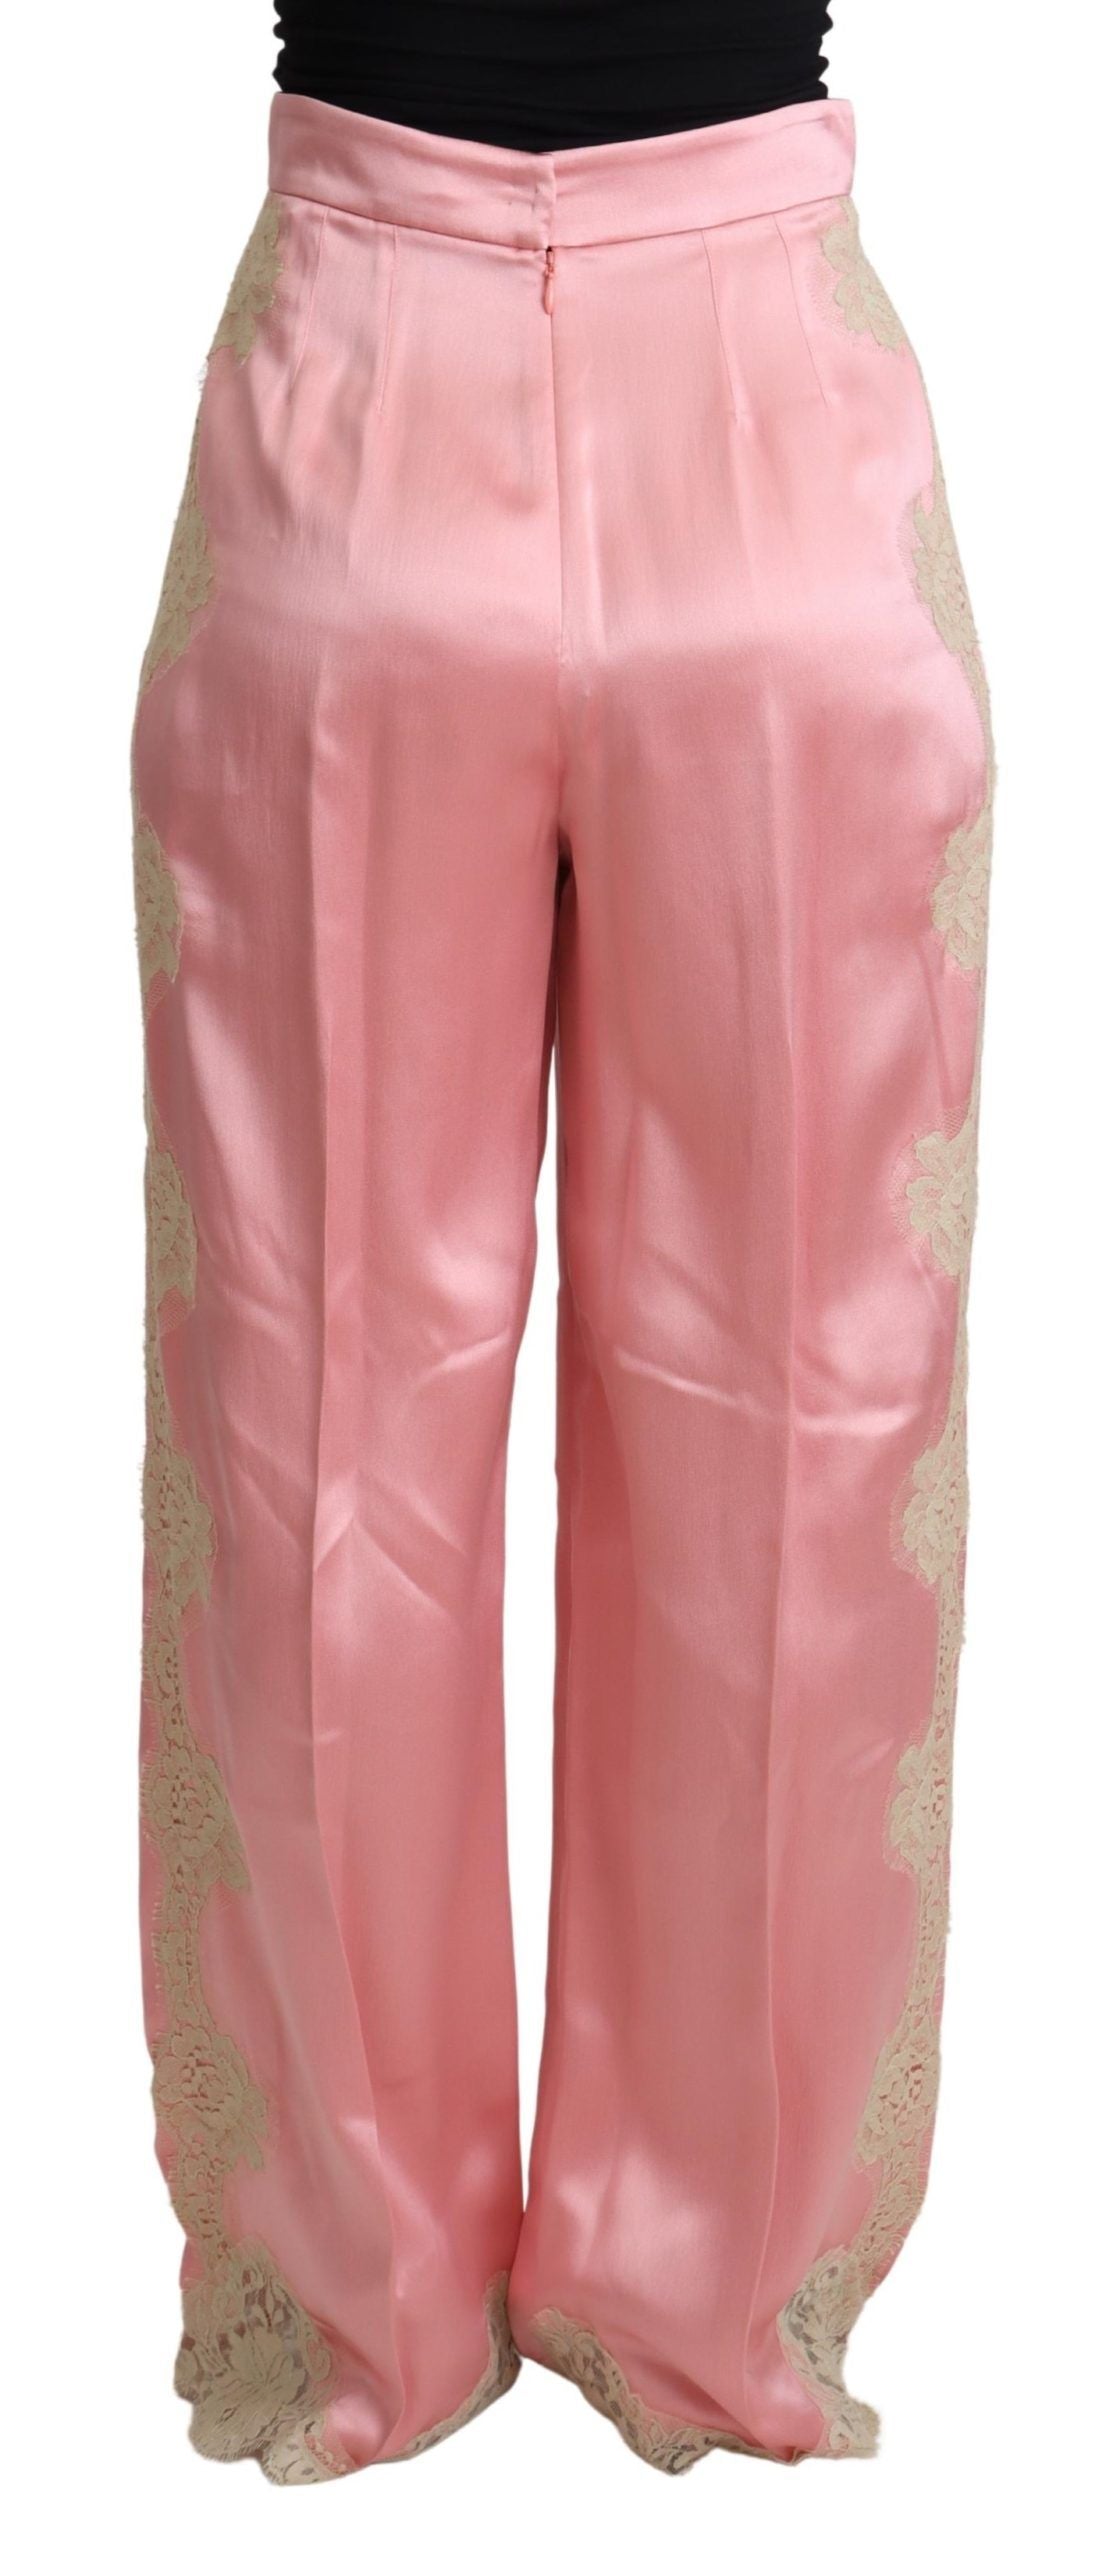 Dolce & Gabbana Pink Lace Trimmed Silk Satin Wide Legs Pants